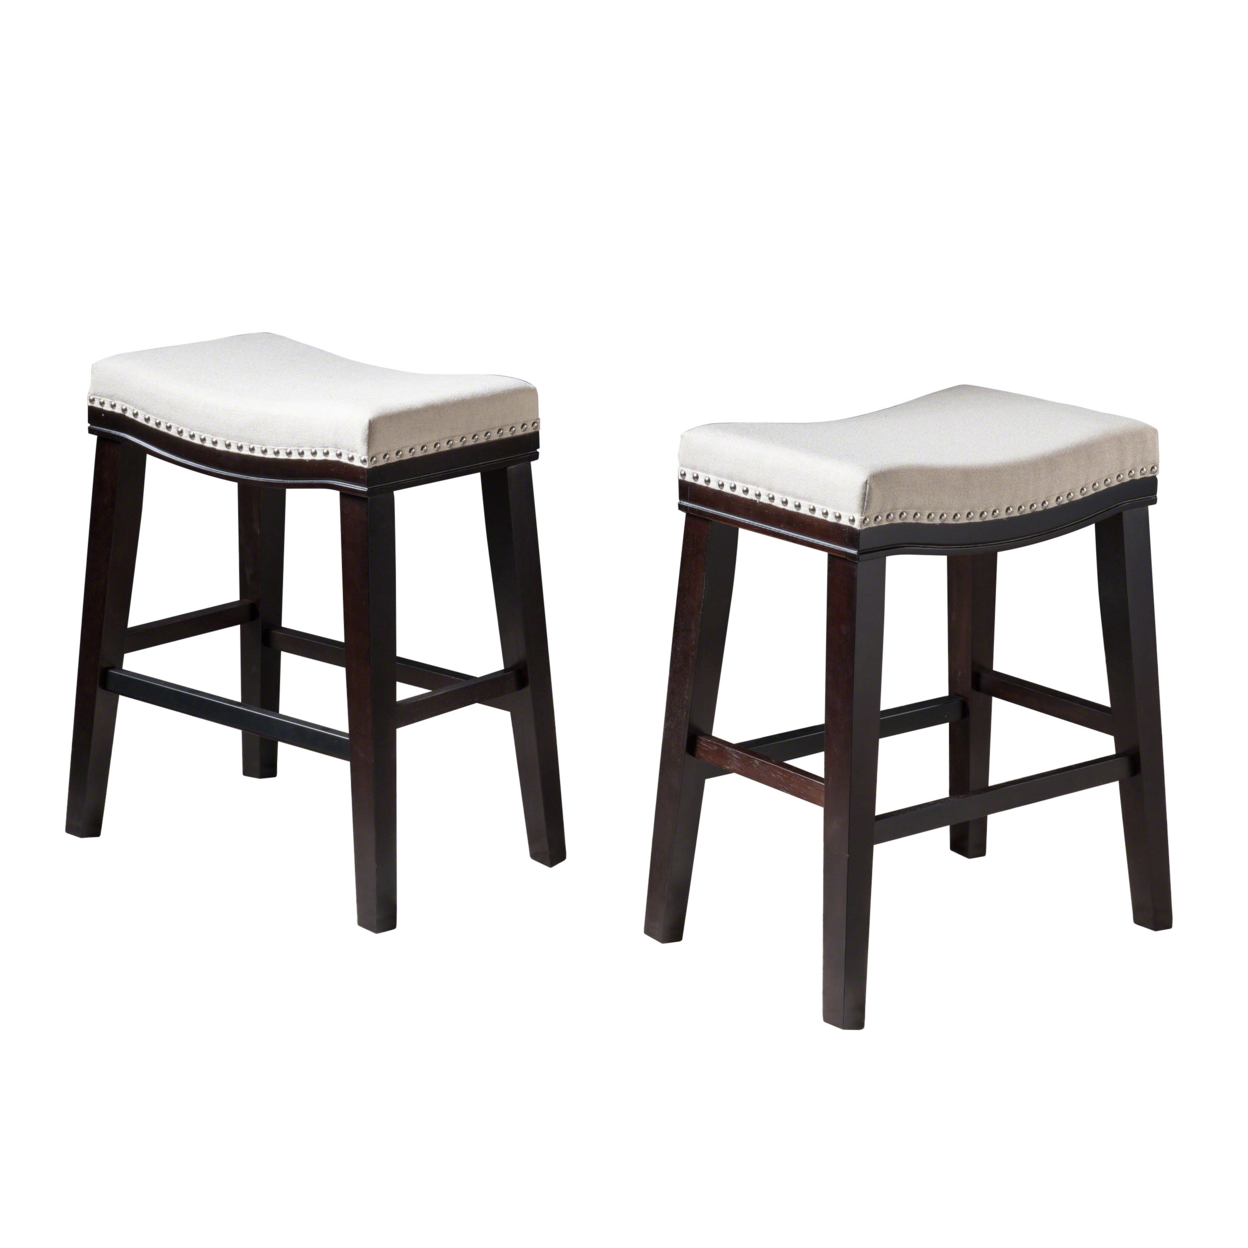 Kainu Contemporary Upholstered Saddle Counter Stool With Nailhead Trim (Set Of 2) - Beige